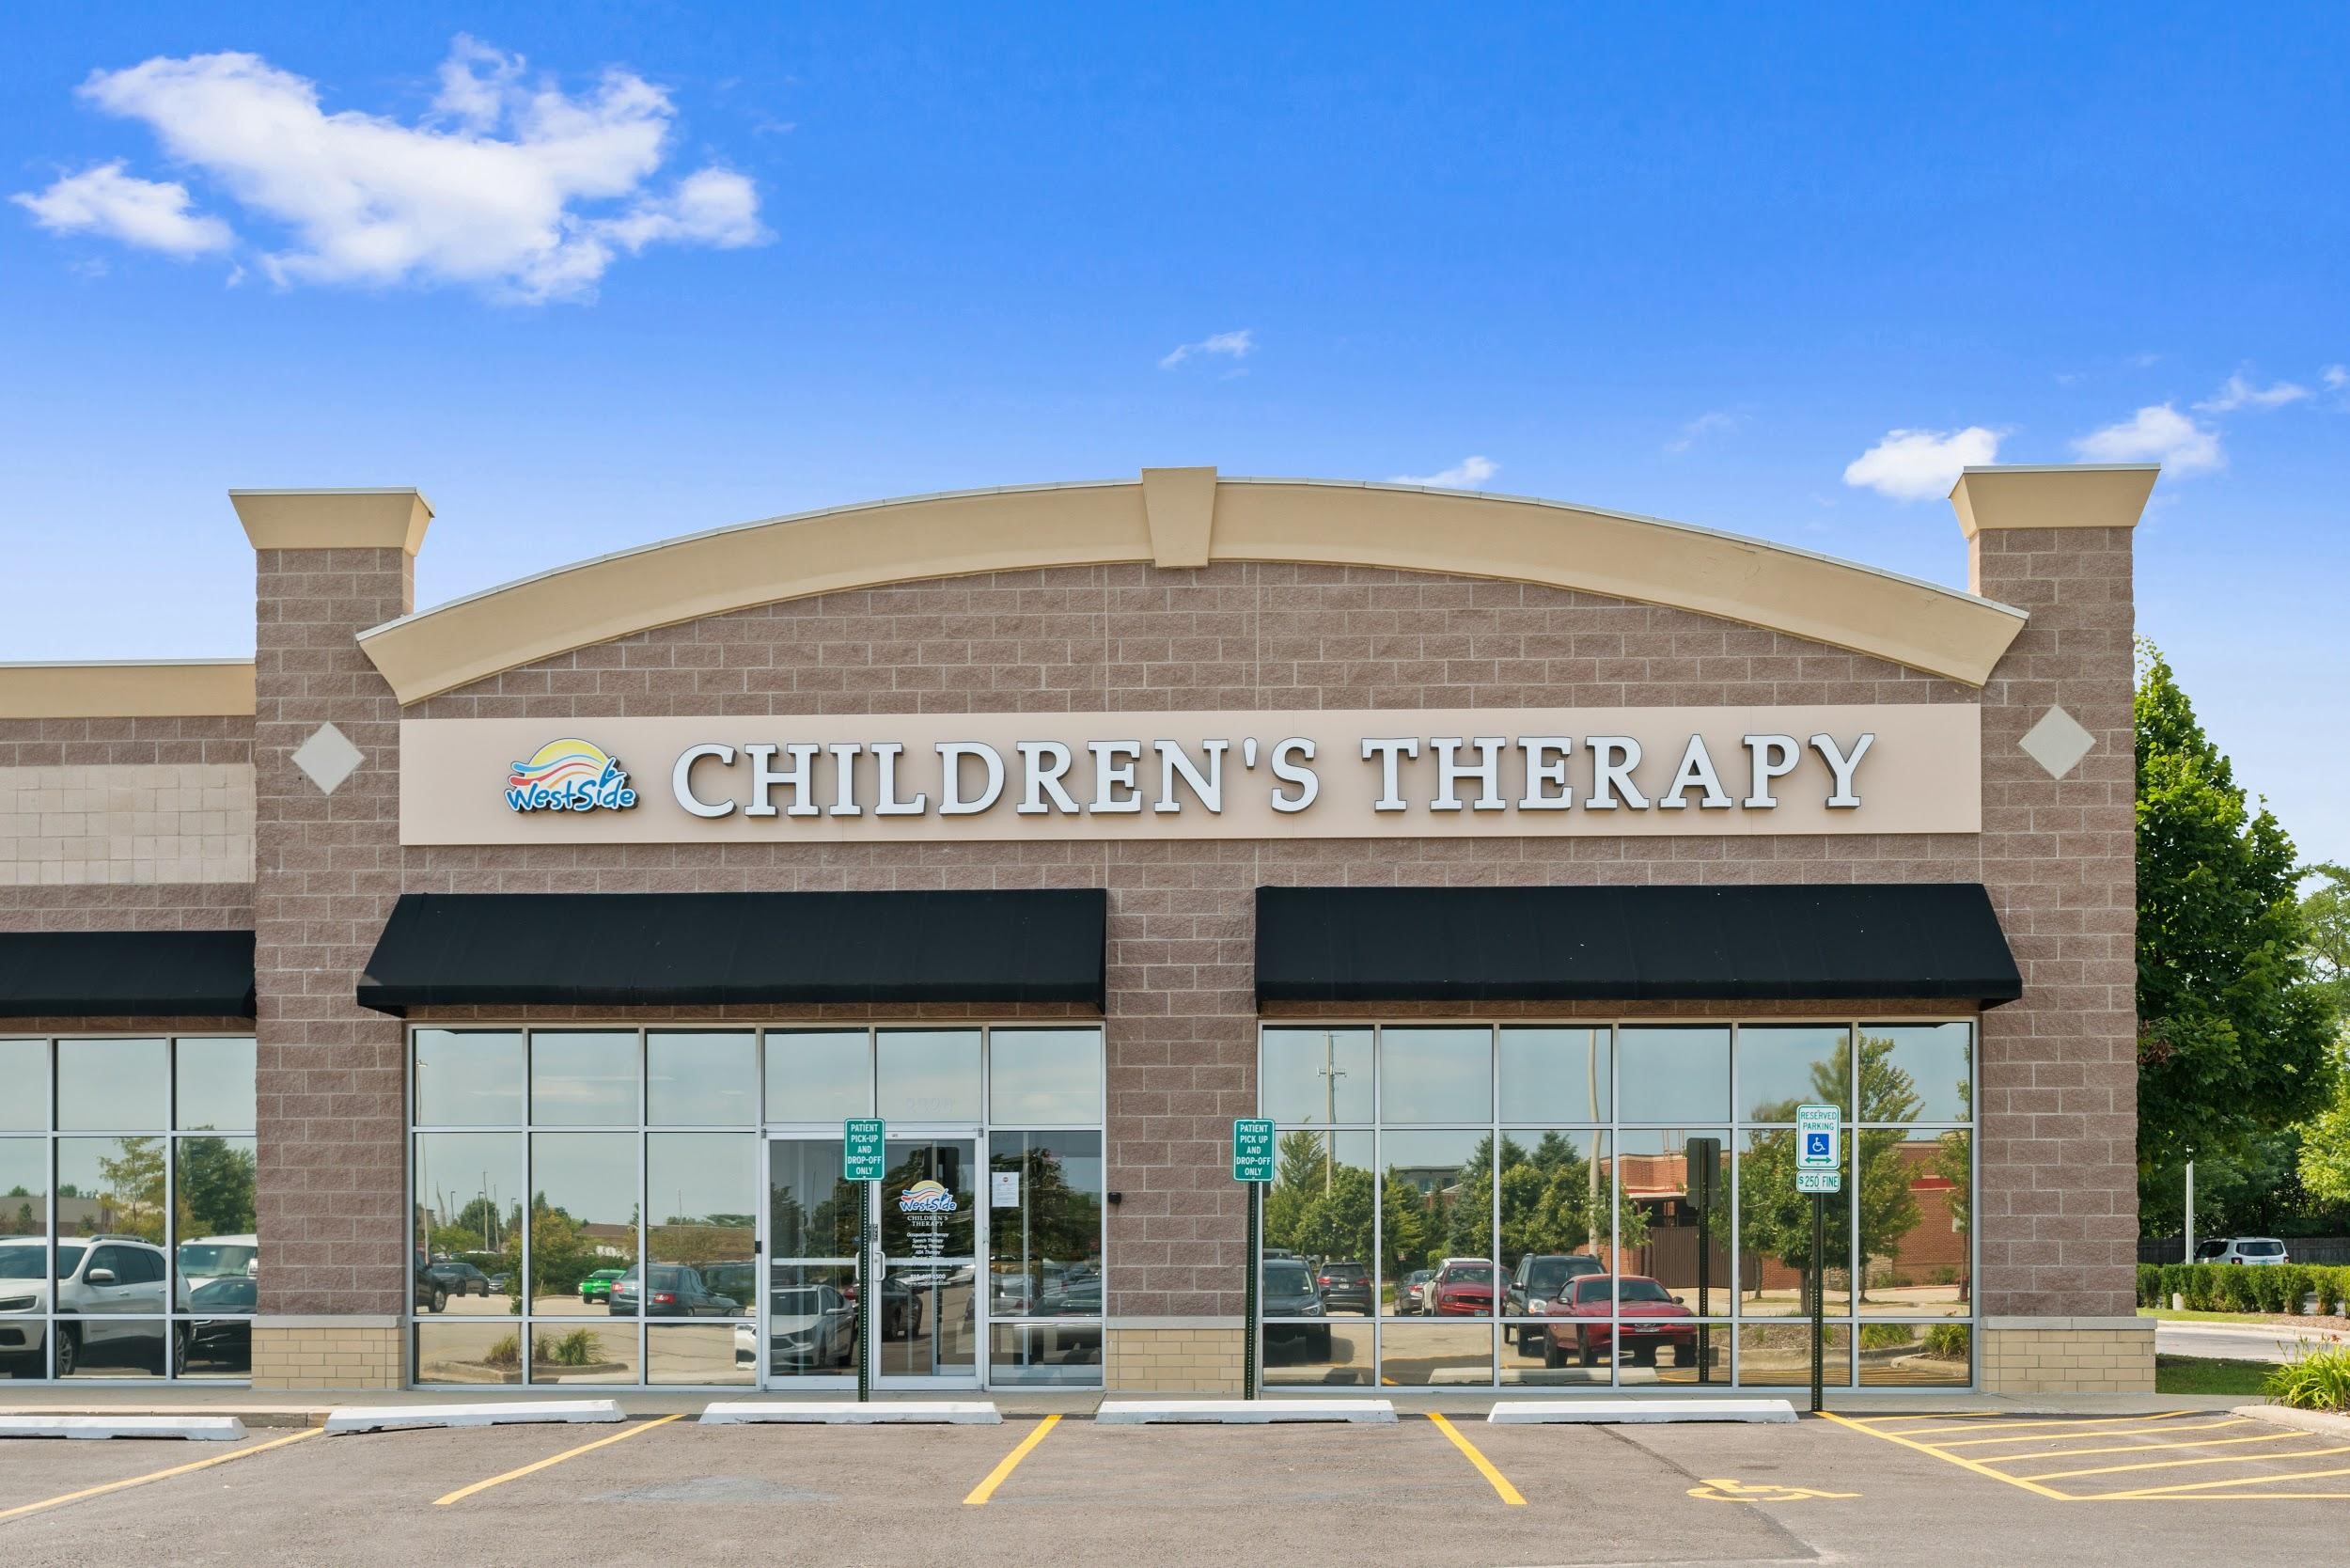 This is a picture of the building exterior of one of the Westside therapy clinics